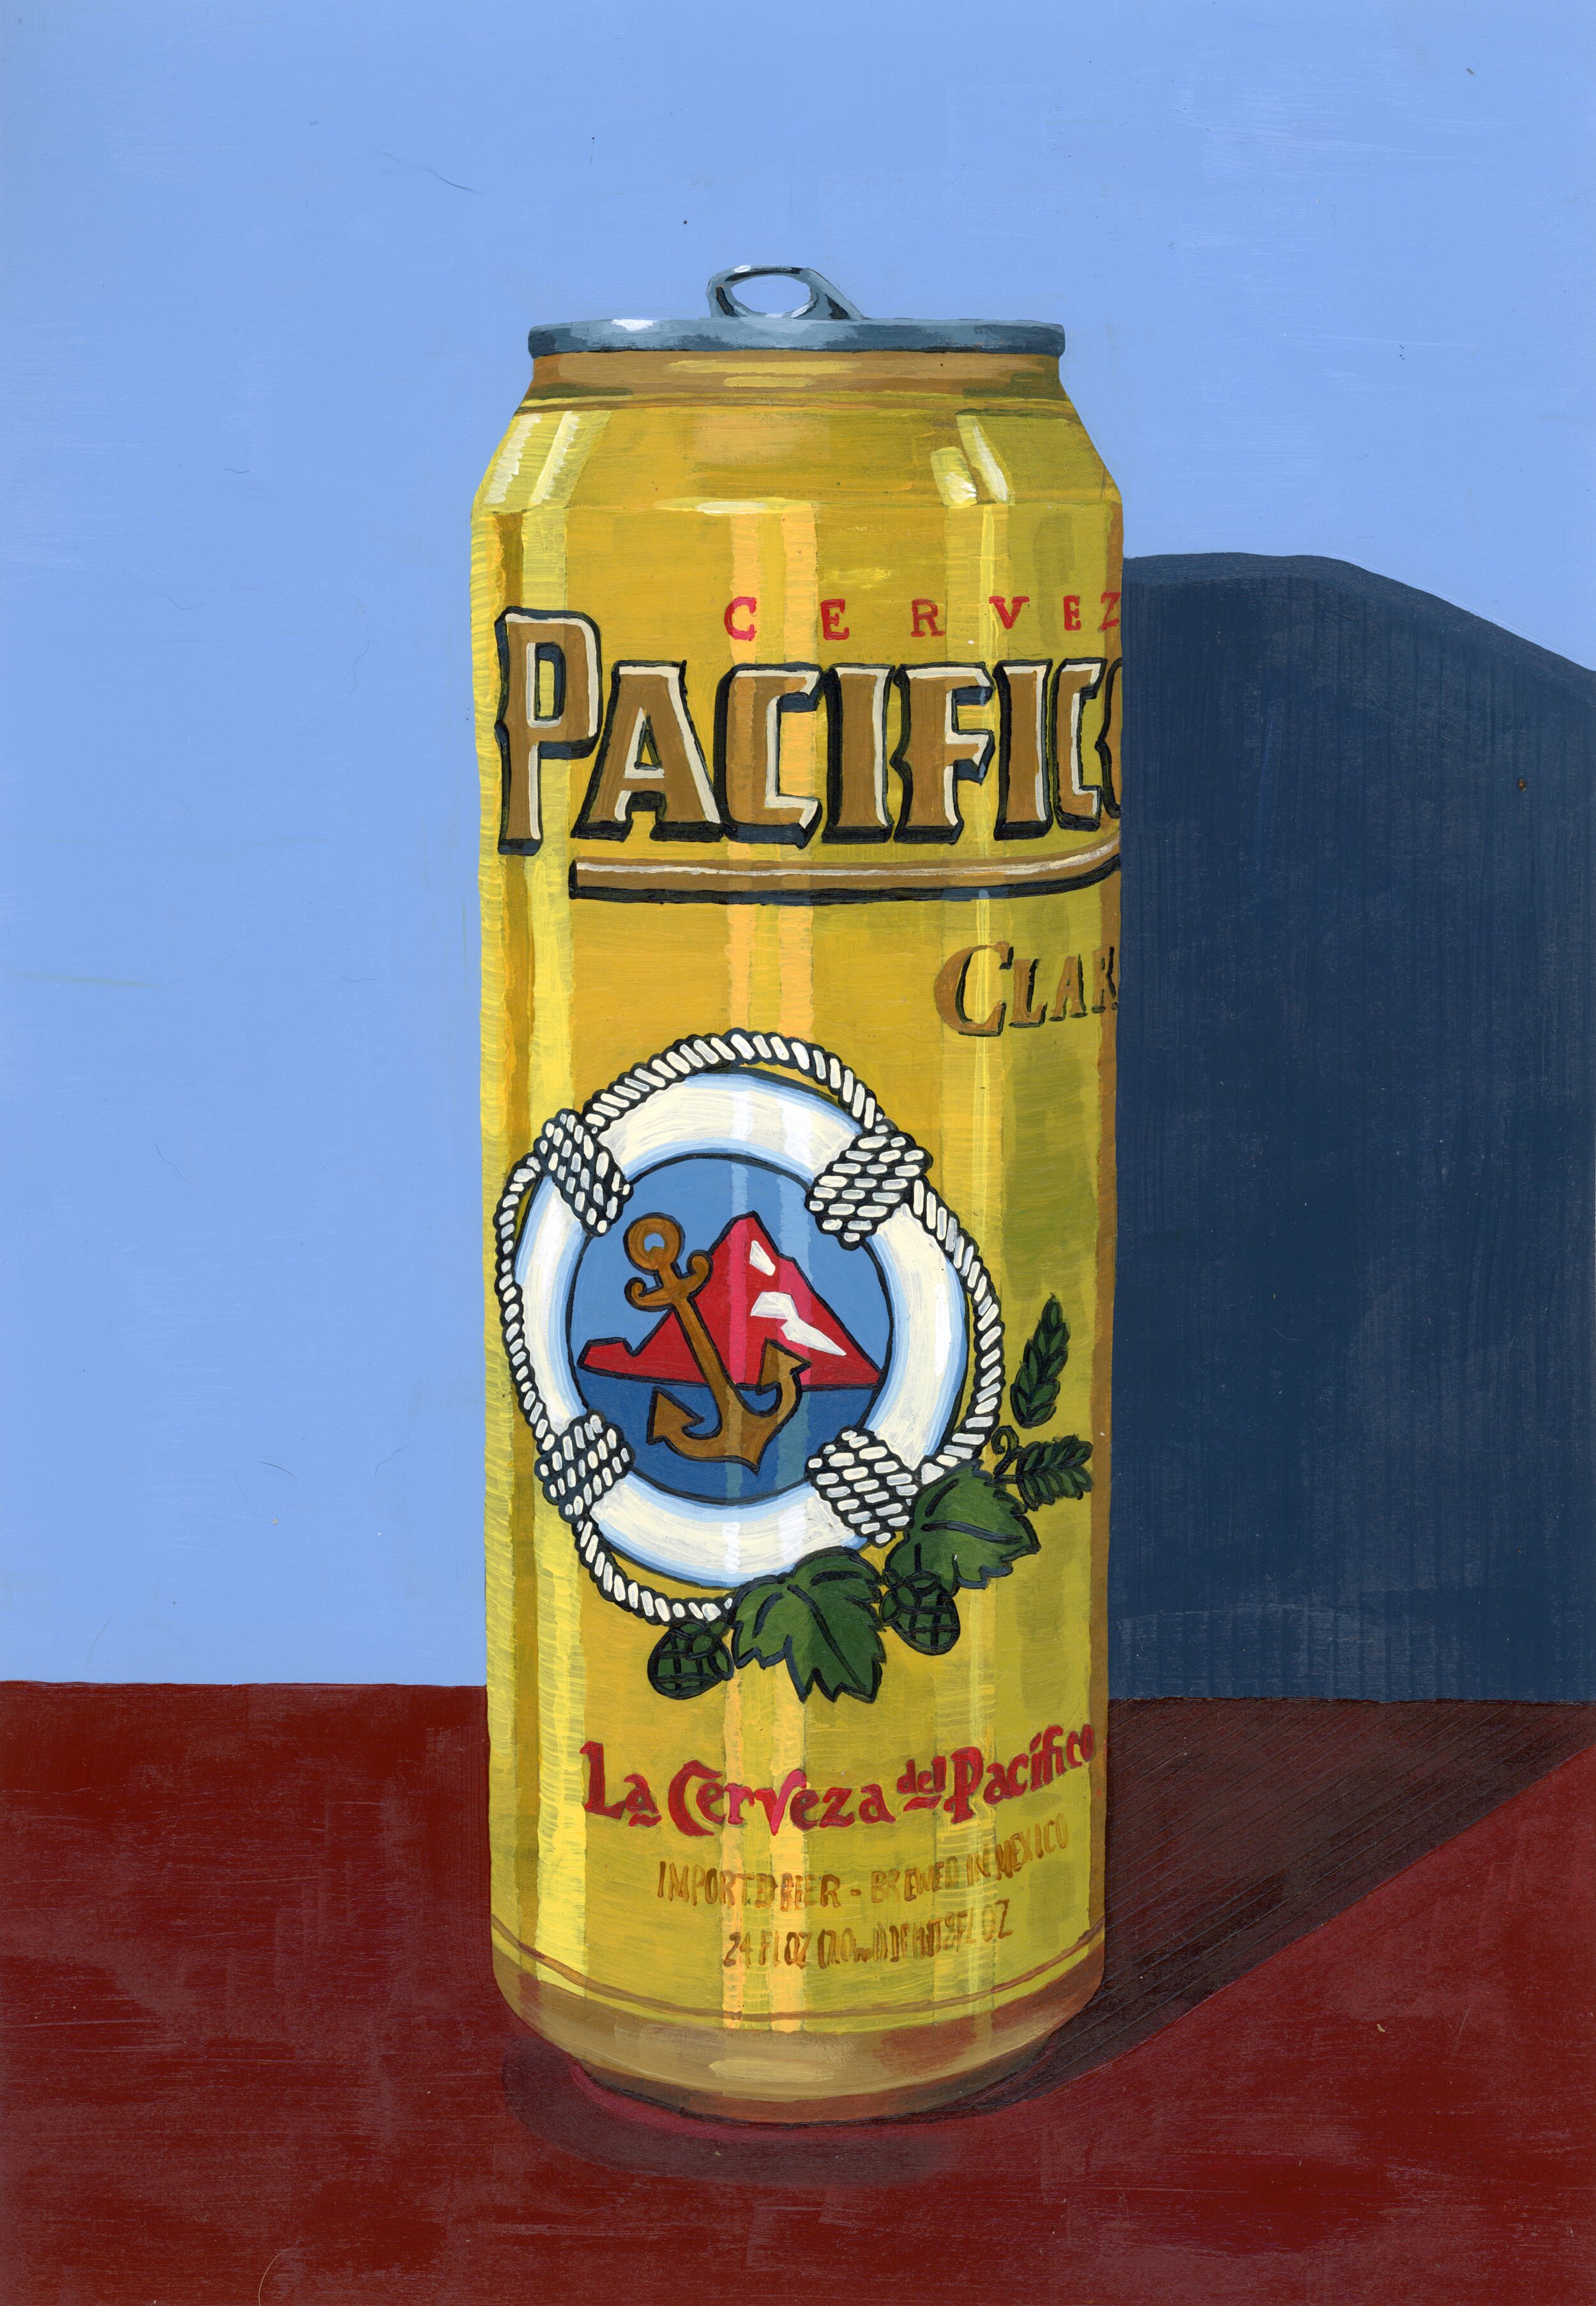   Pacifico   Acrylic on Paper   8 x 11.5 in.  2020 